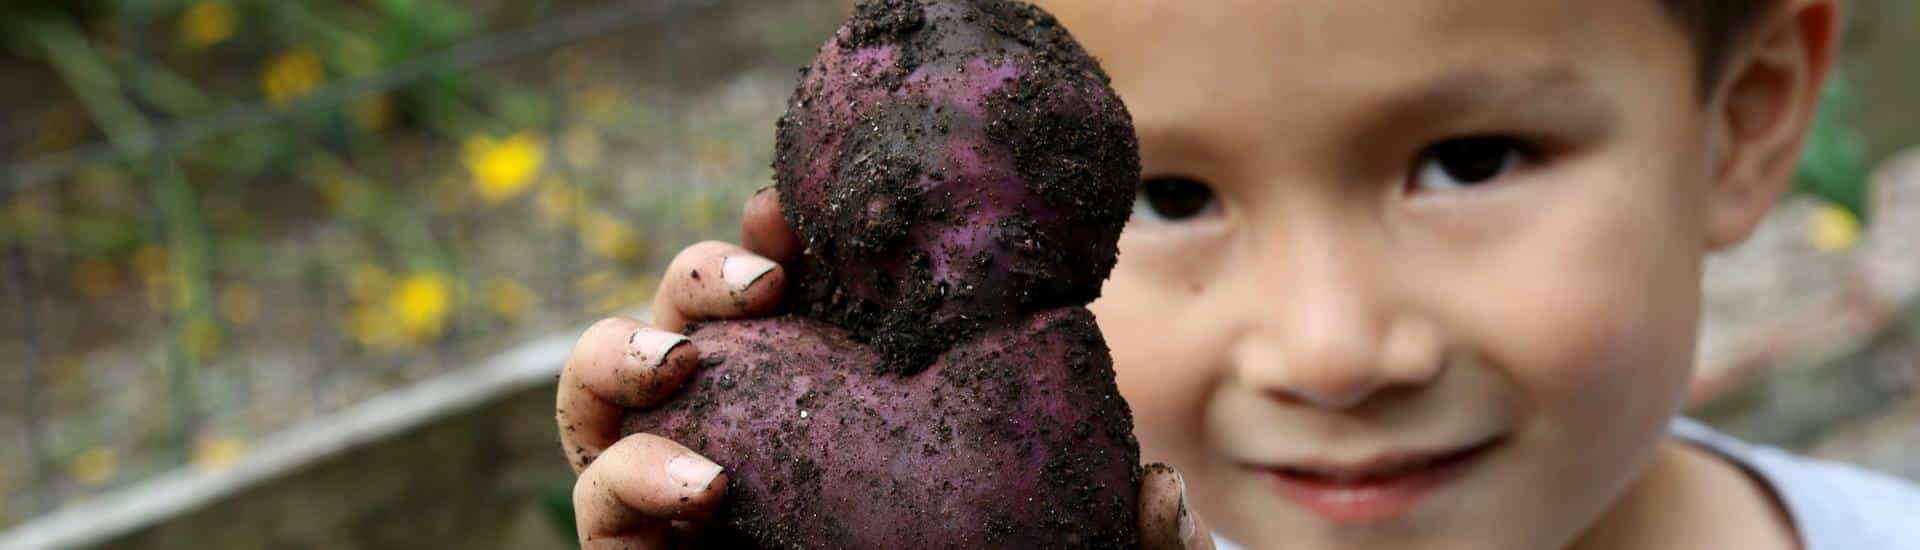 A boy holds up a potato he harvested in the school garden